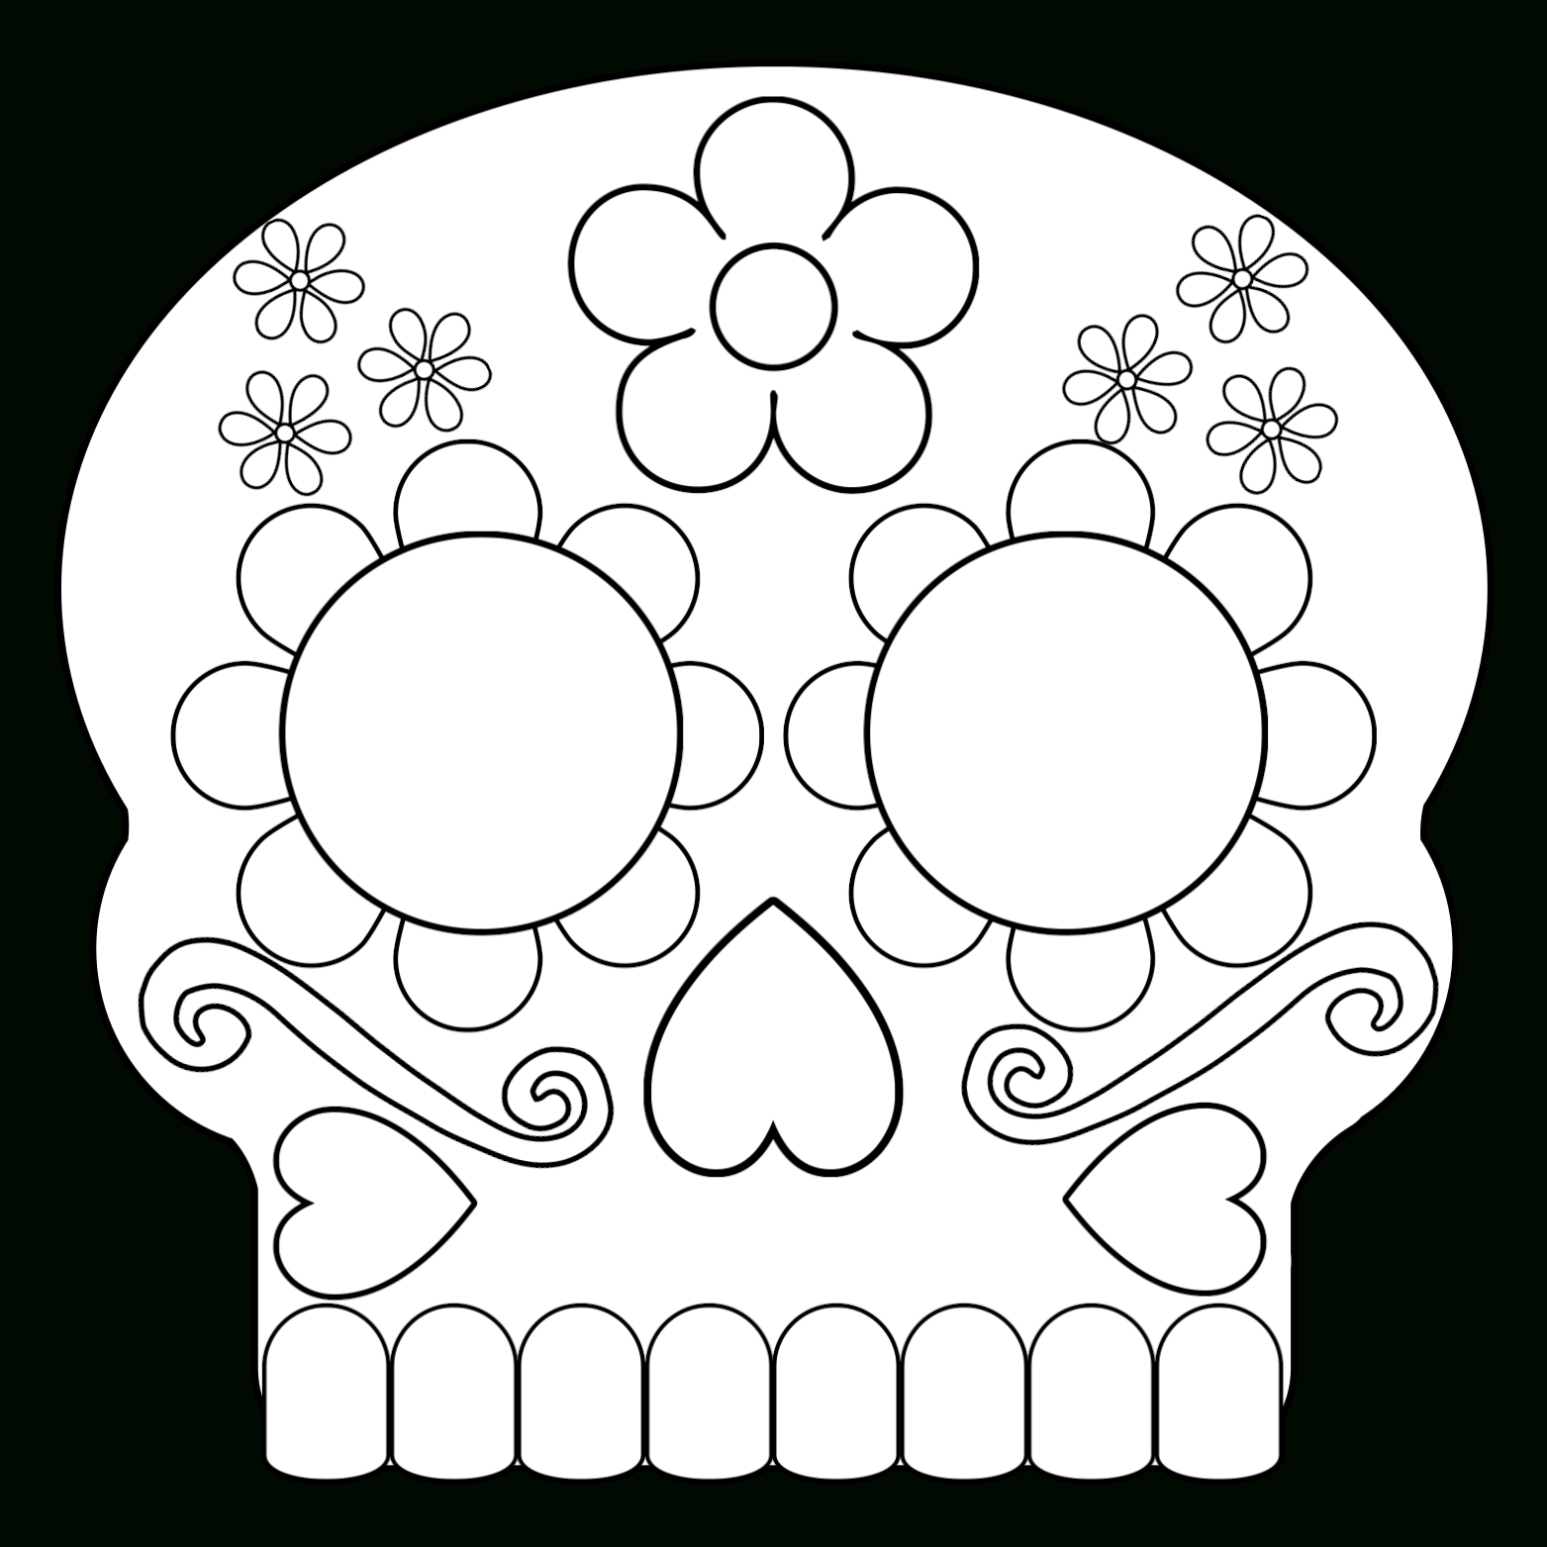 Day Of The Dead Masks Sugar Skulls Free Printable - Paper Trail Design throughout Blank Sugar Skull Template